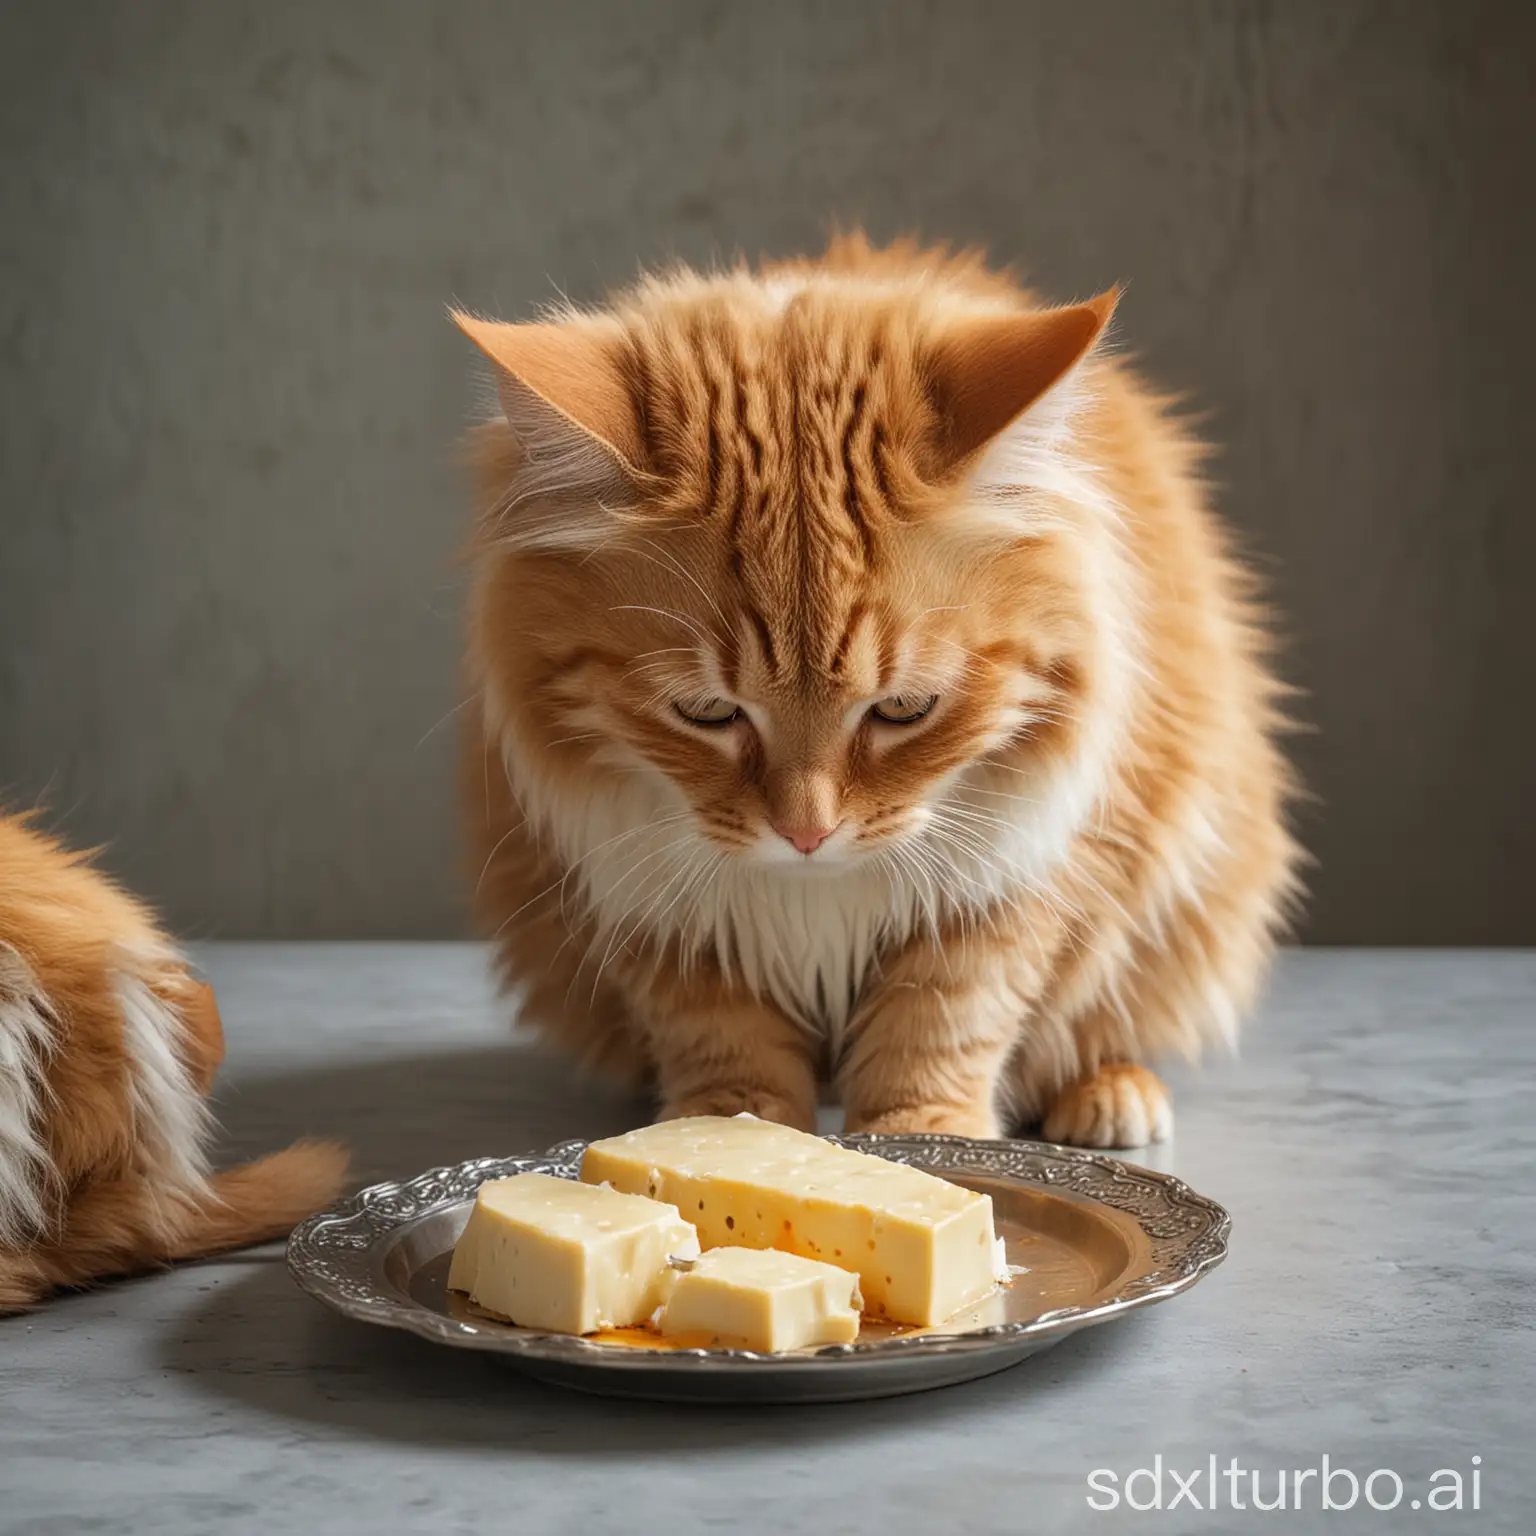 an orange fluffy cat eating cheese from a silver plate